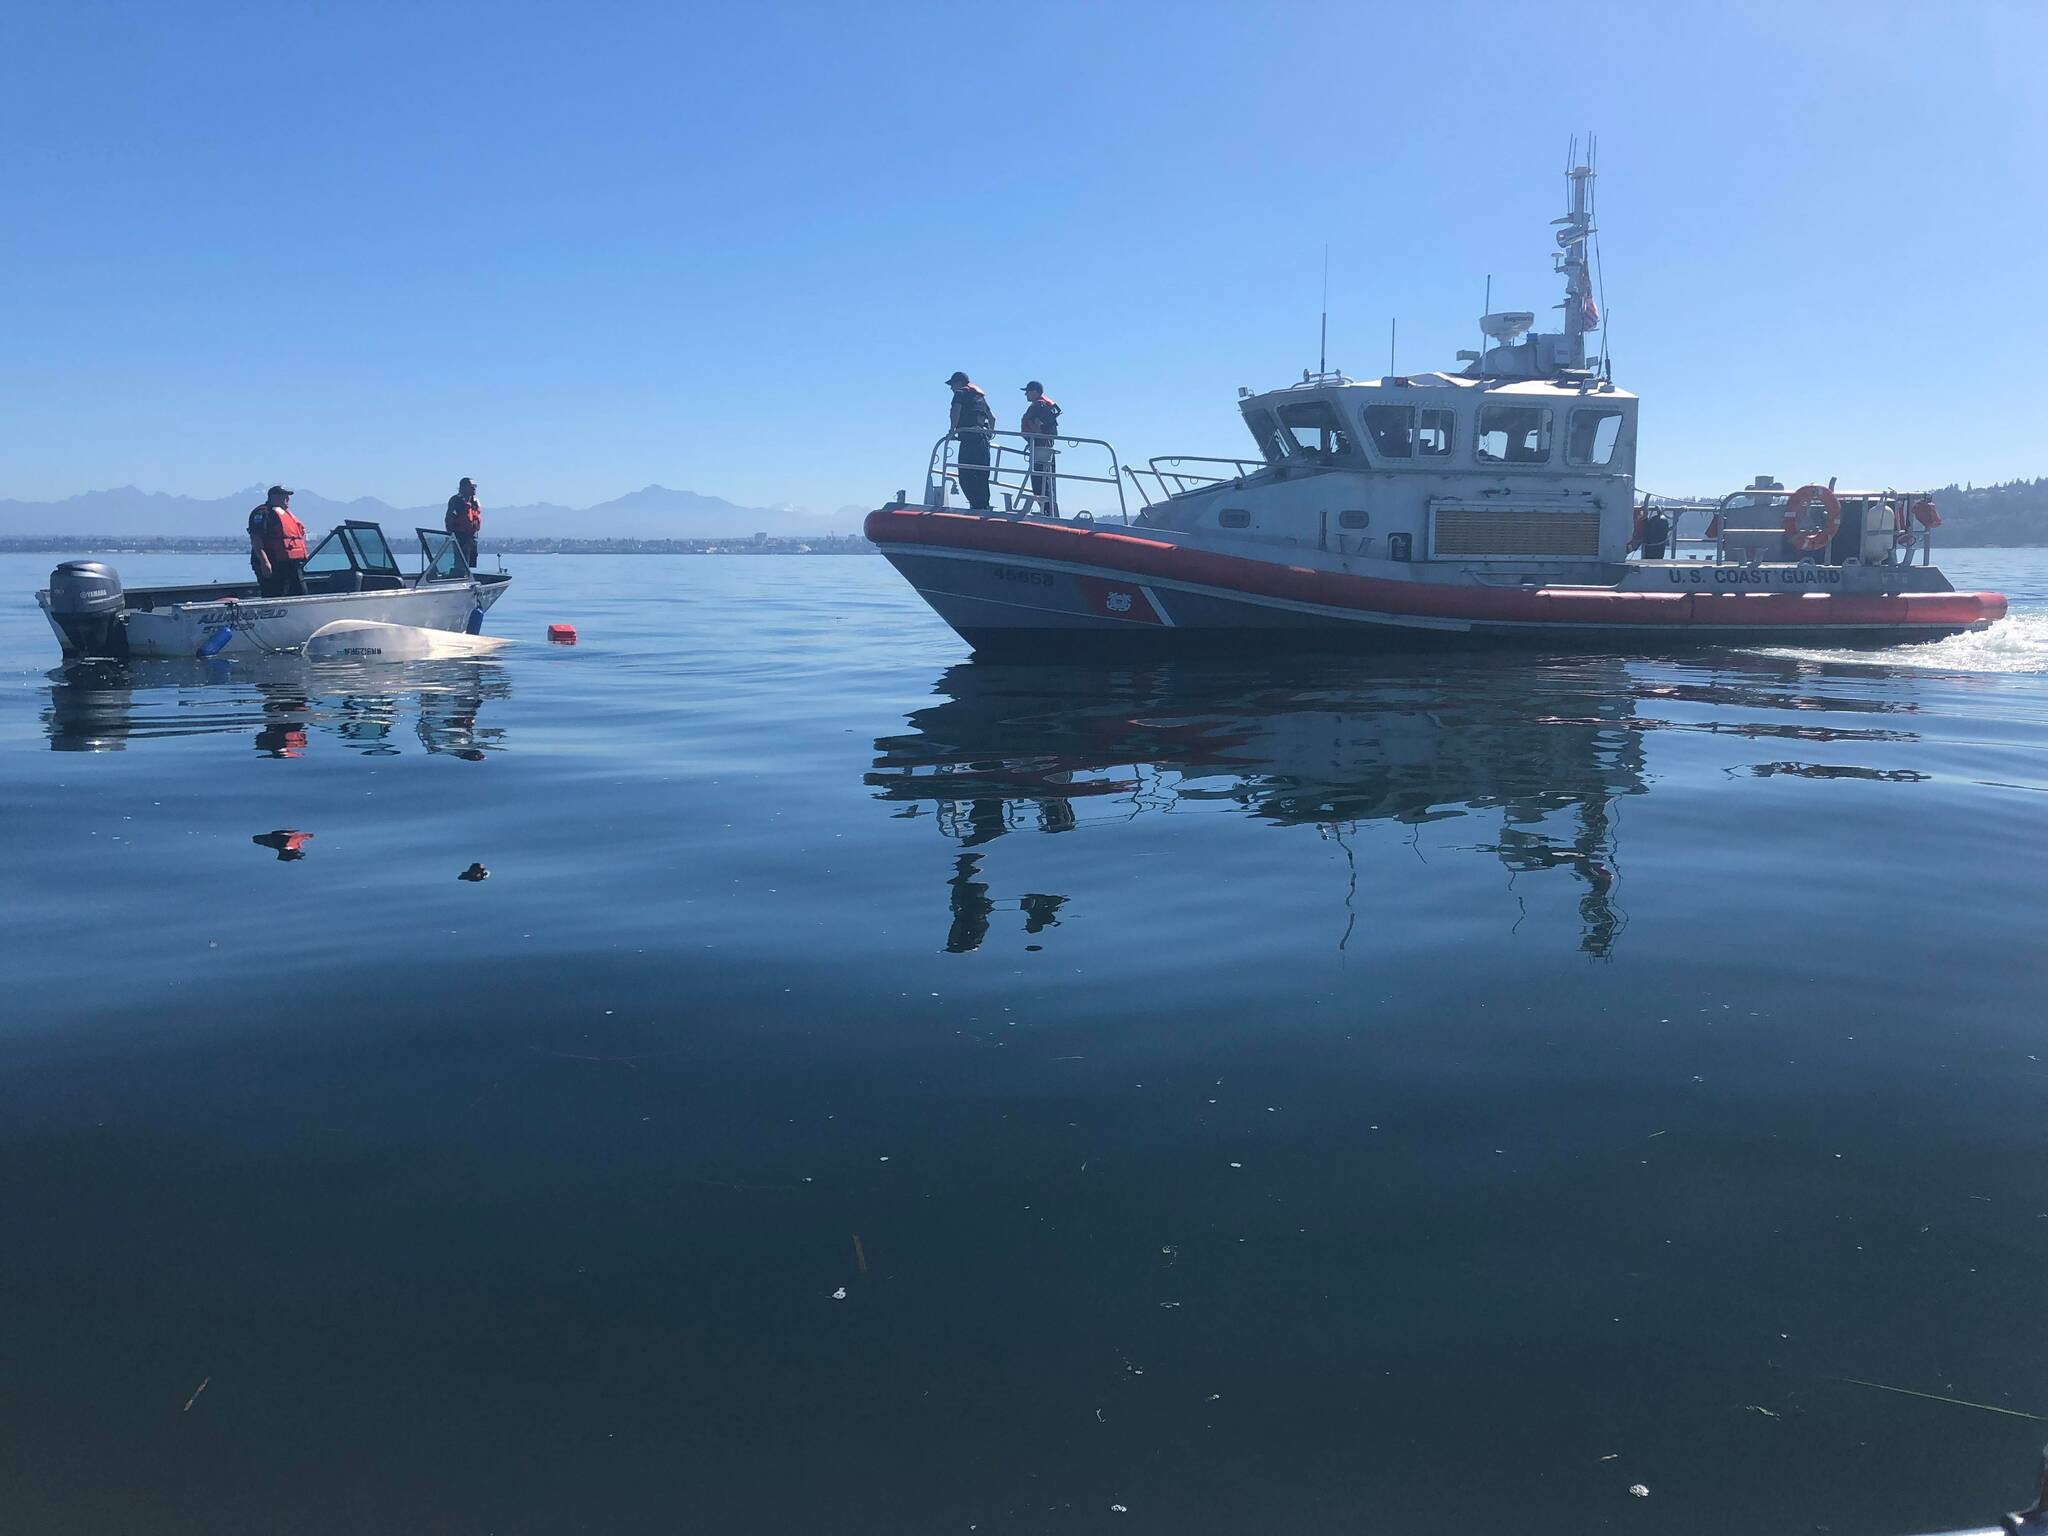 Photo by Carl Larsen
The Coast Guard rescued a 12-foot-long aluminum boat Monday morning.